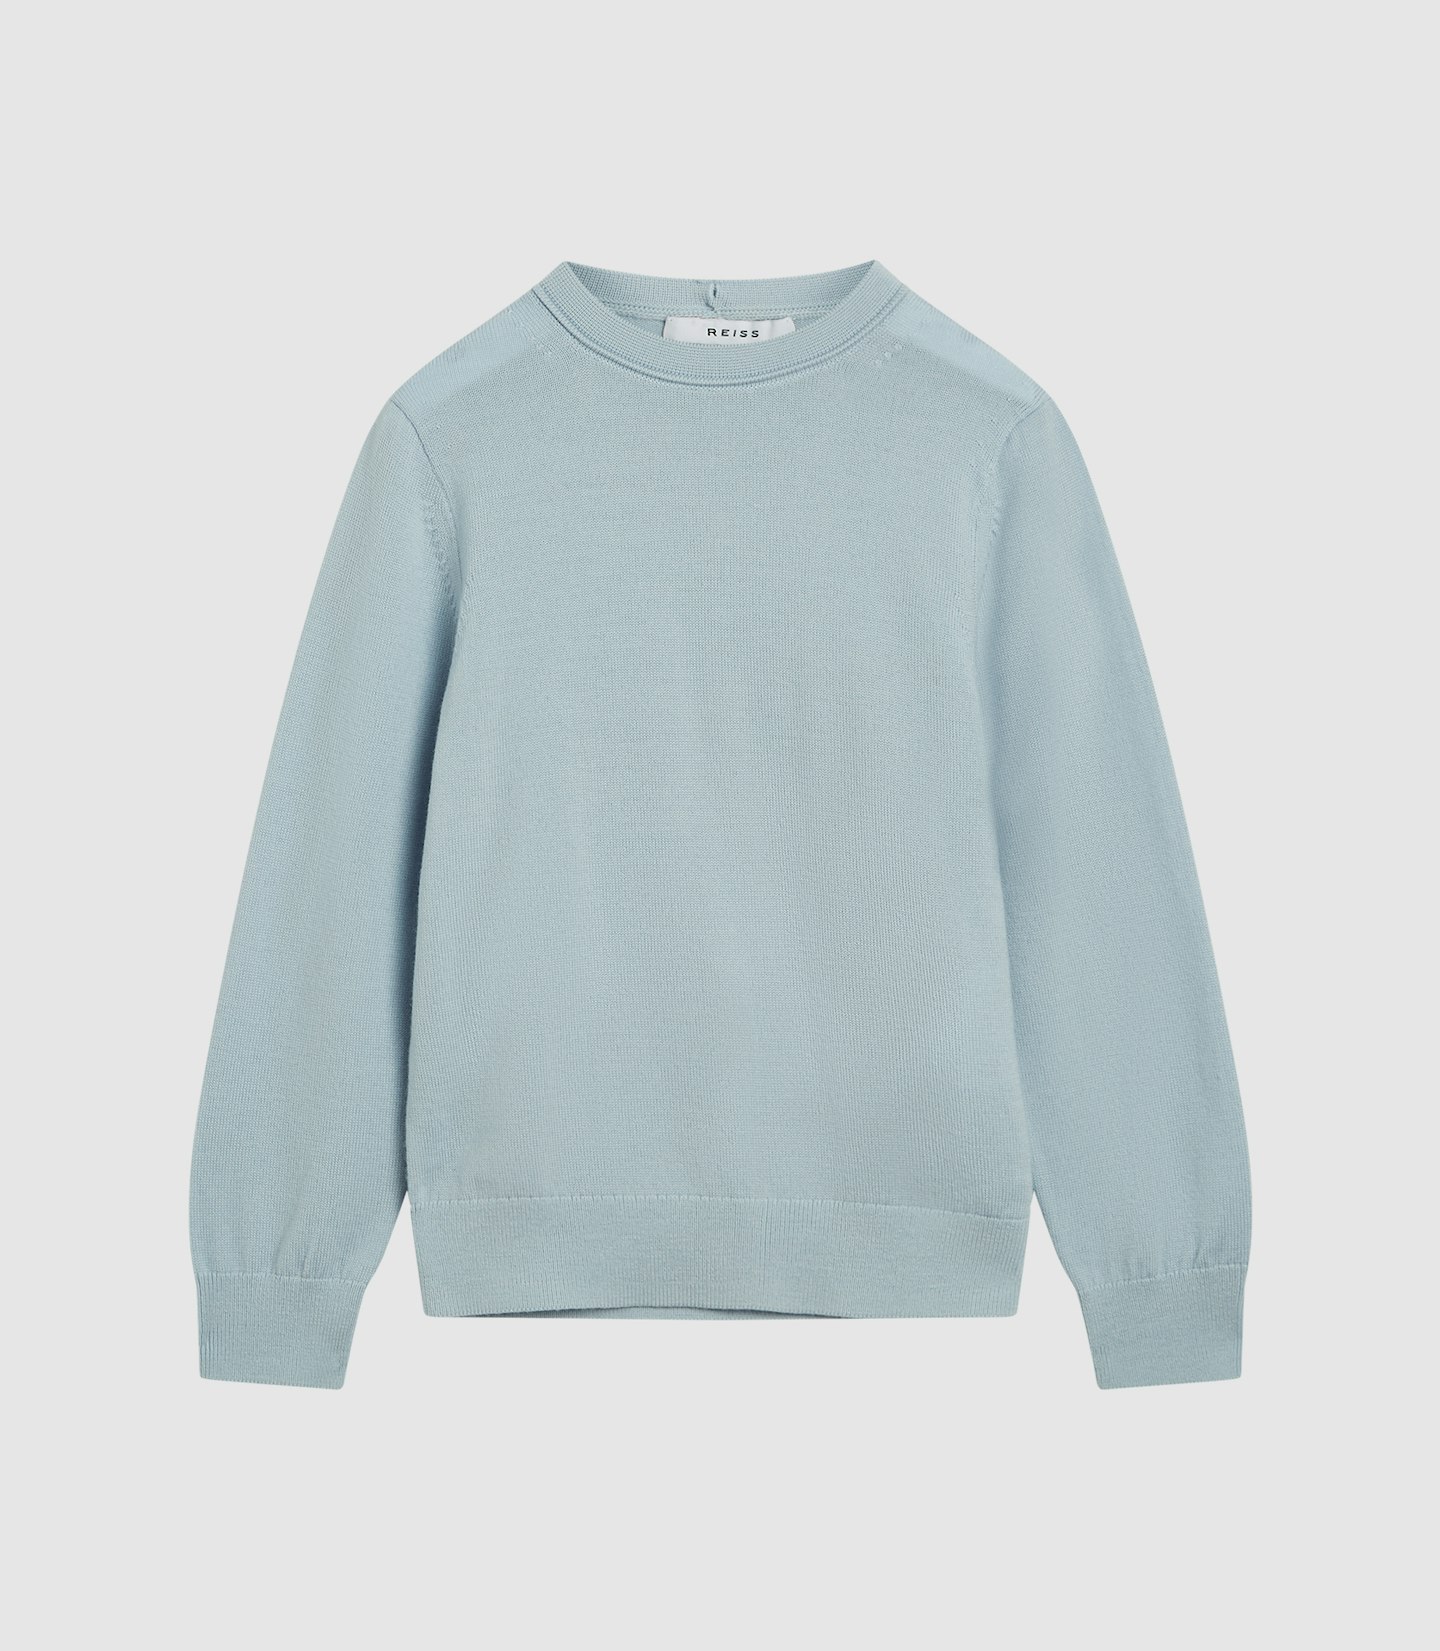 Crew-Neck Knitted Jumper, £32